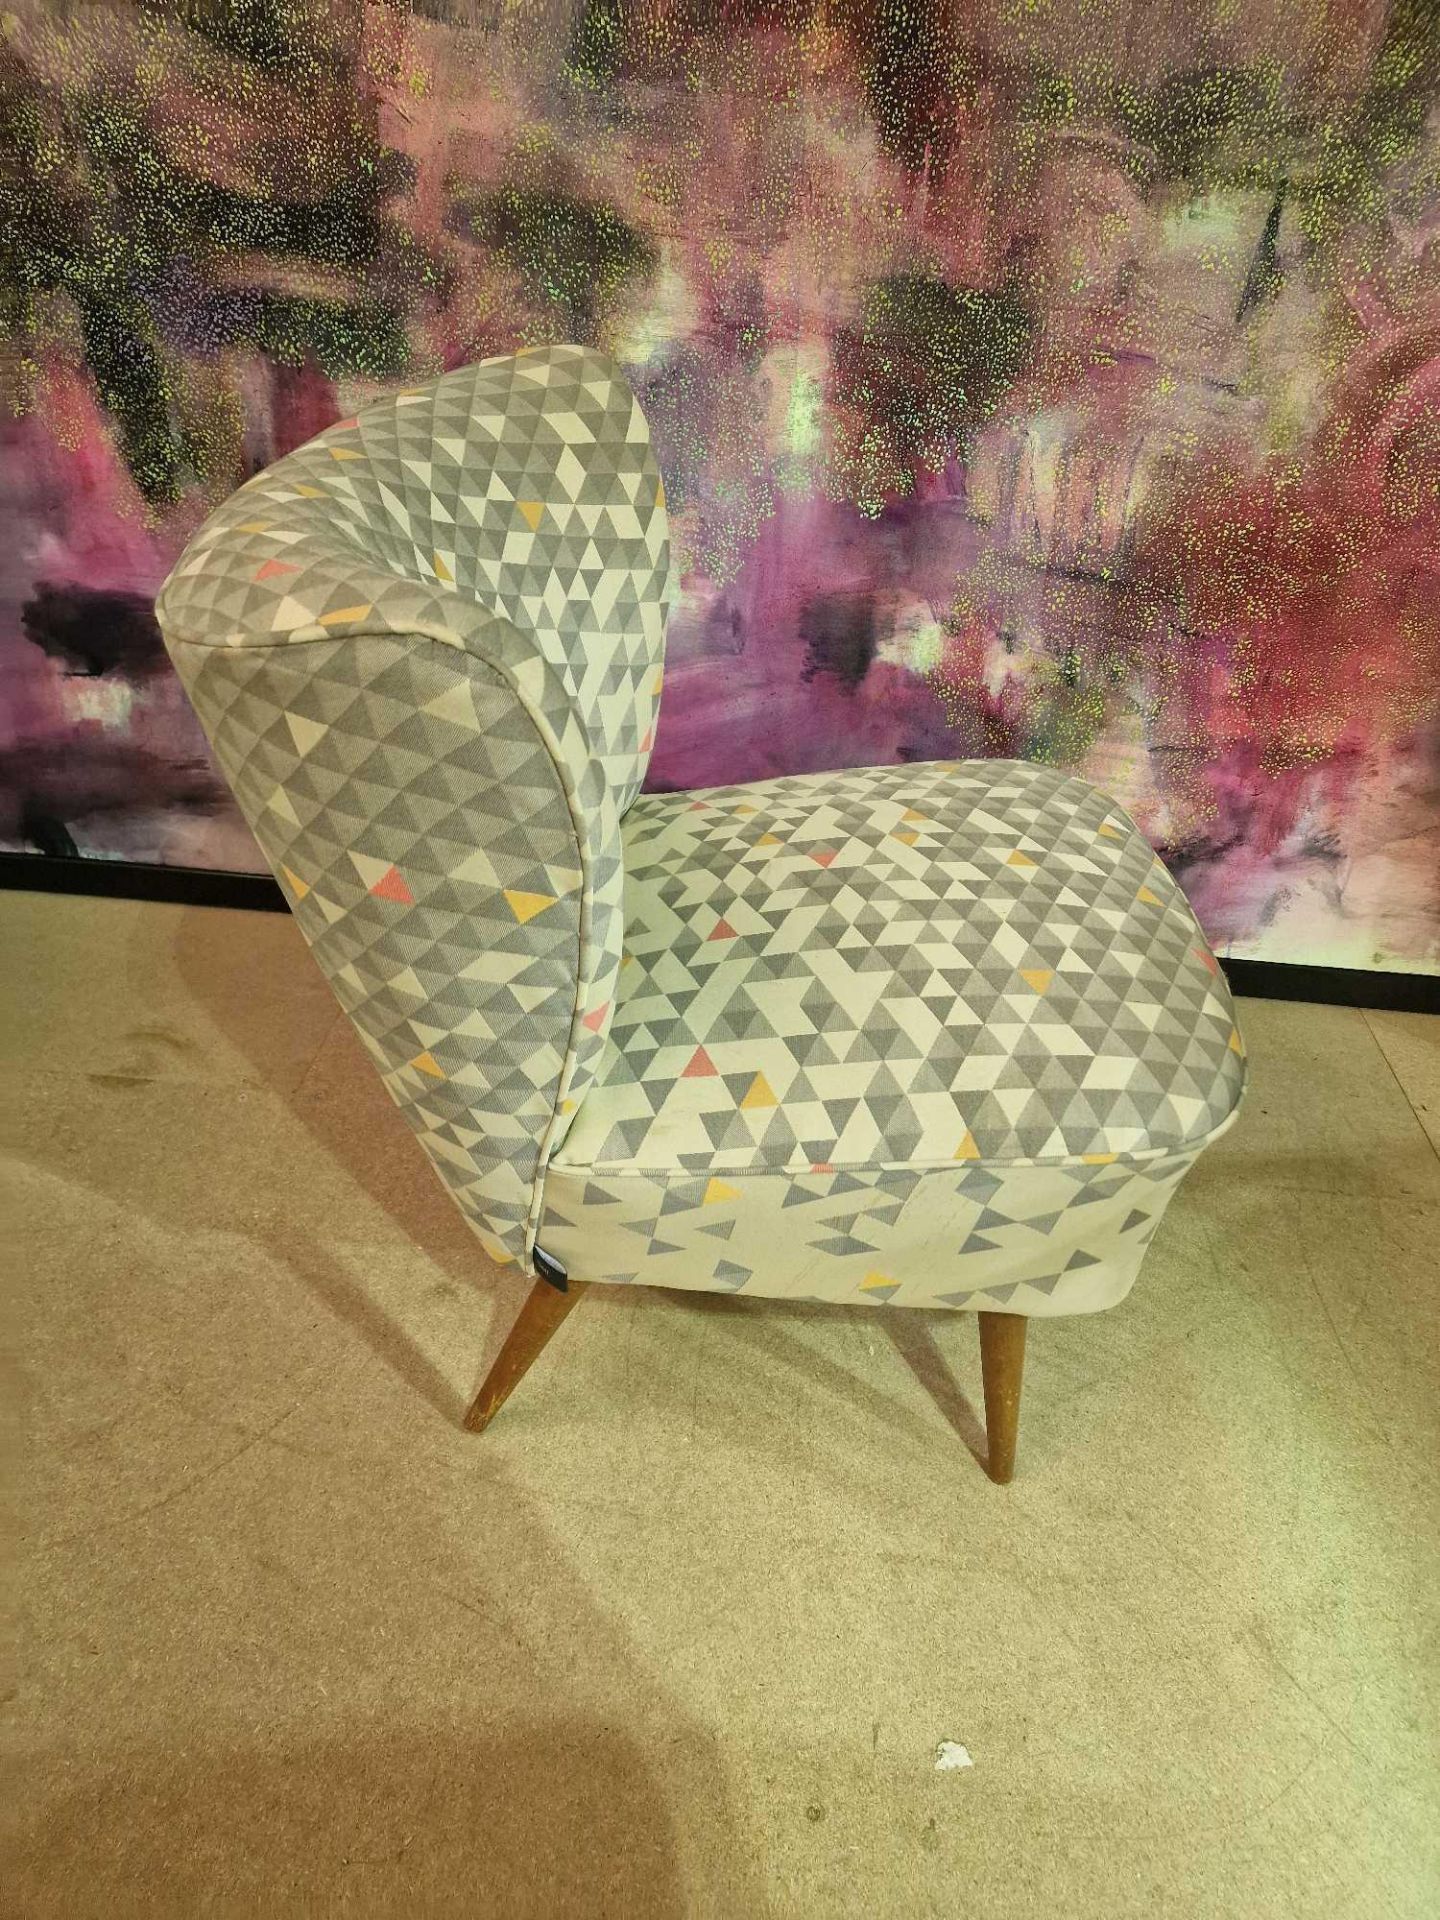 Slipper chair by Self Style Steeped in luxury, the geometric pattern upholstered chair is an elegant - Image 3 of 4